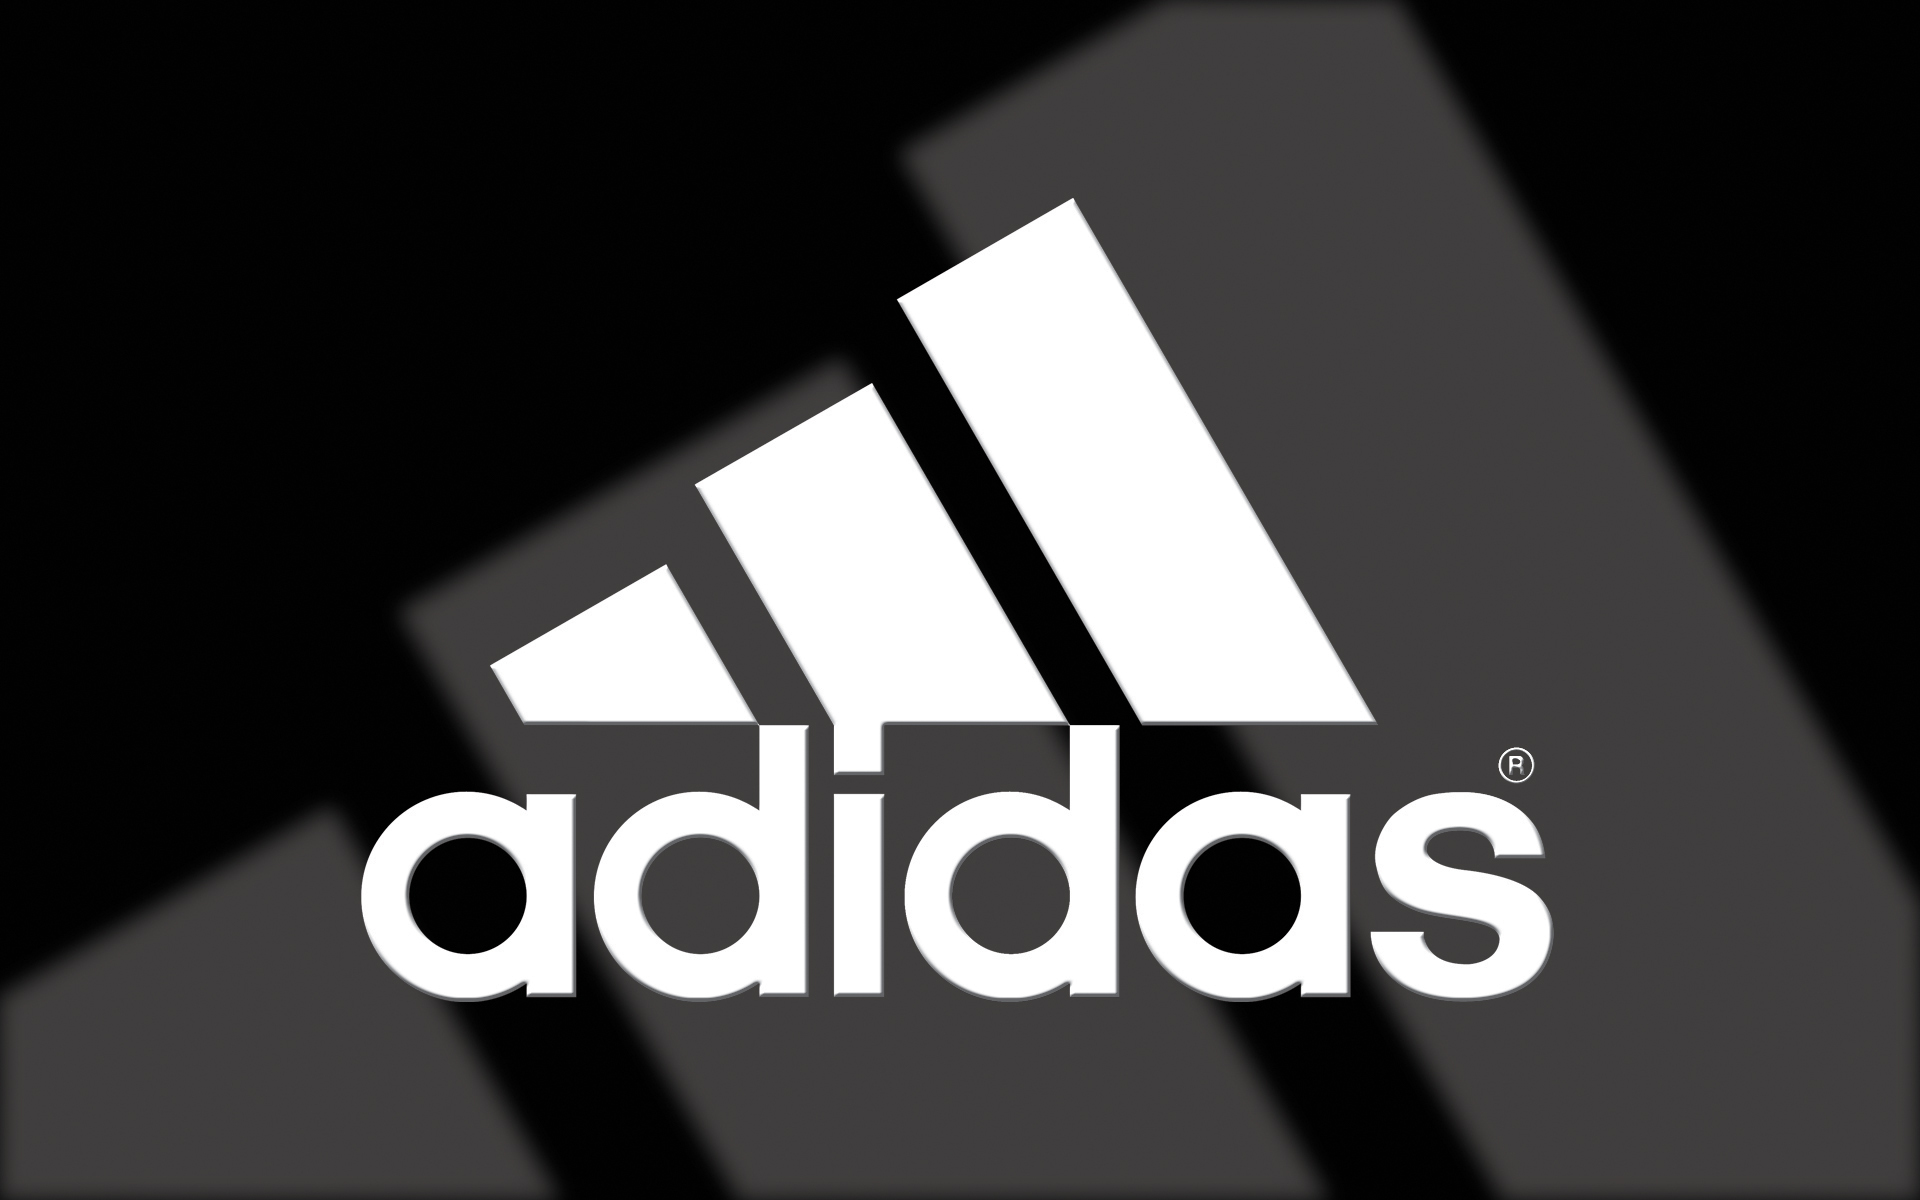 Products Adidas 1920x1200